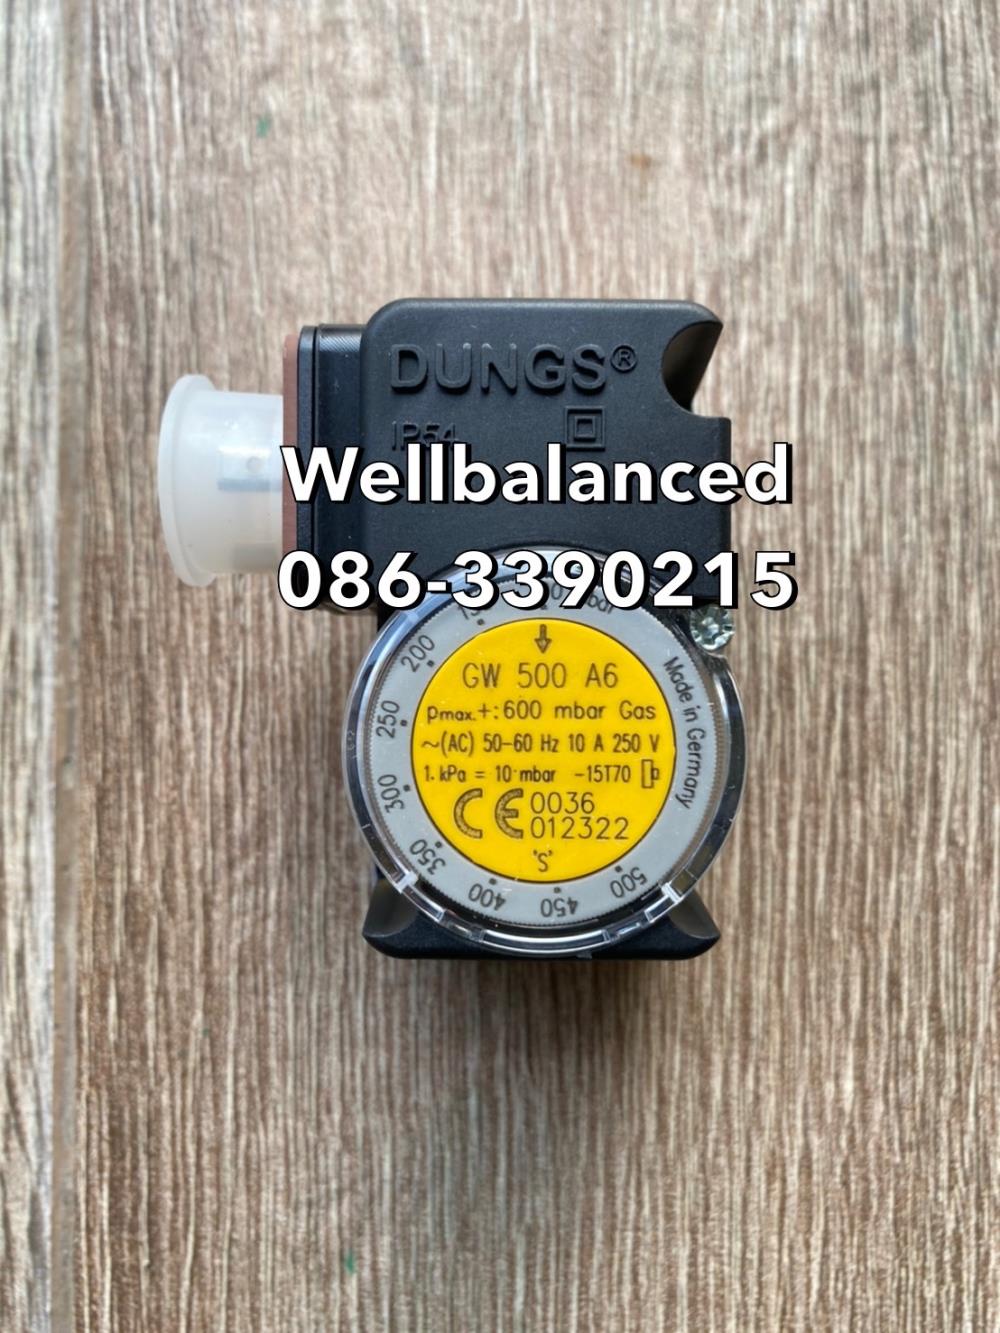 " DUNGS " Pressure Switch Model : GW 500 A6," DUNGS " Pressure Switch Model : GW 500 A6," DUNGS " Pressure Switch Model : GW 500 A6,Instruments and Controls/Switches